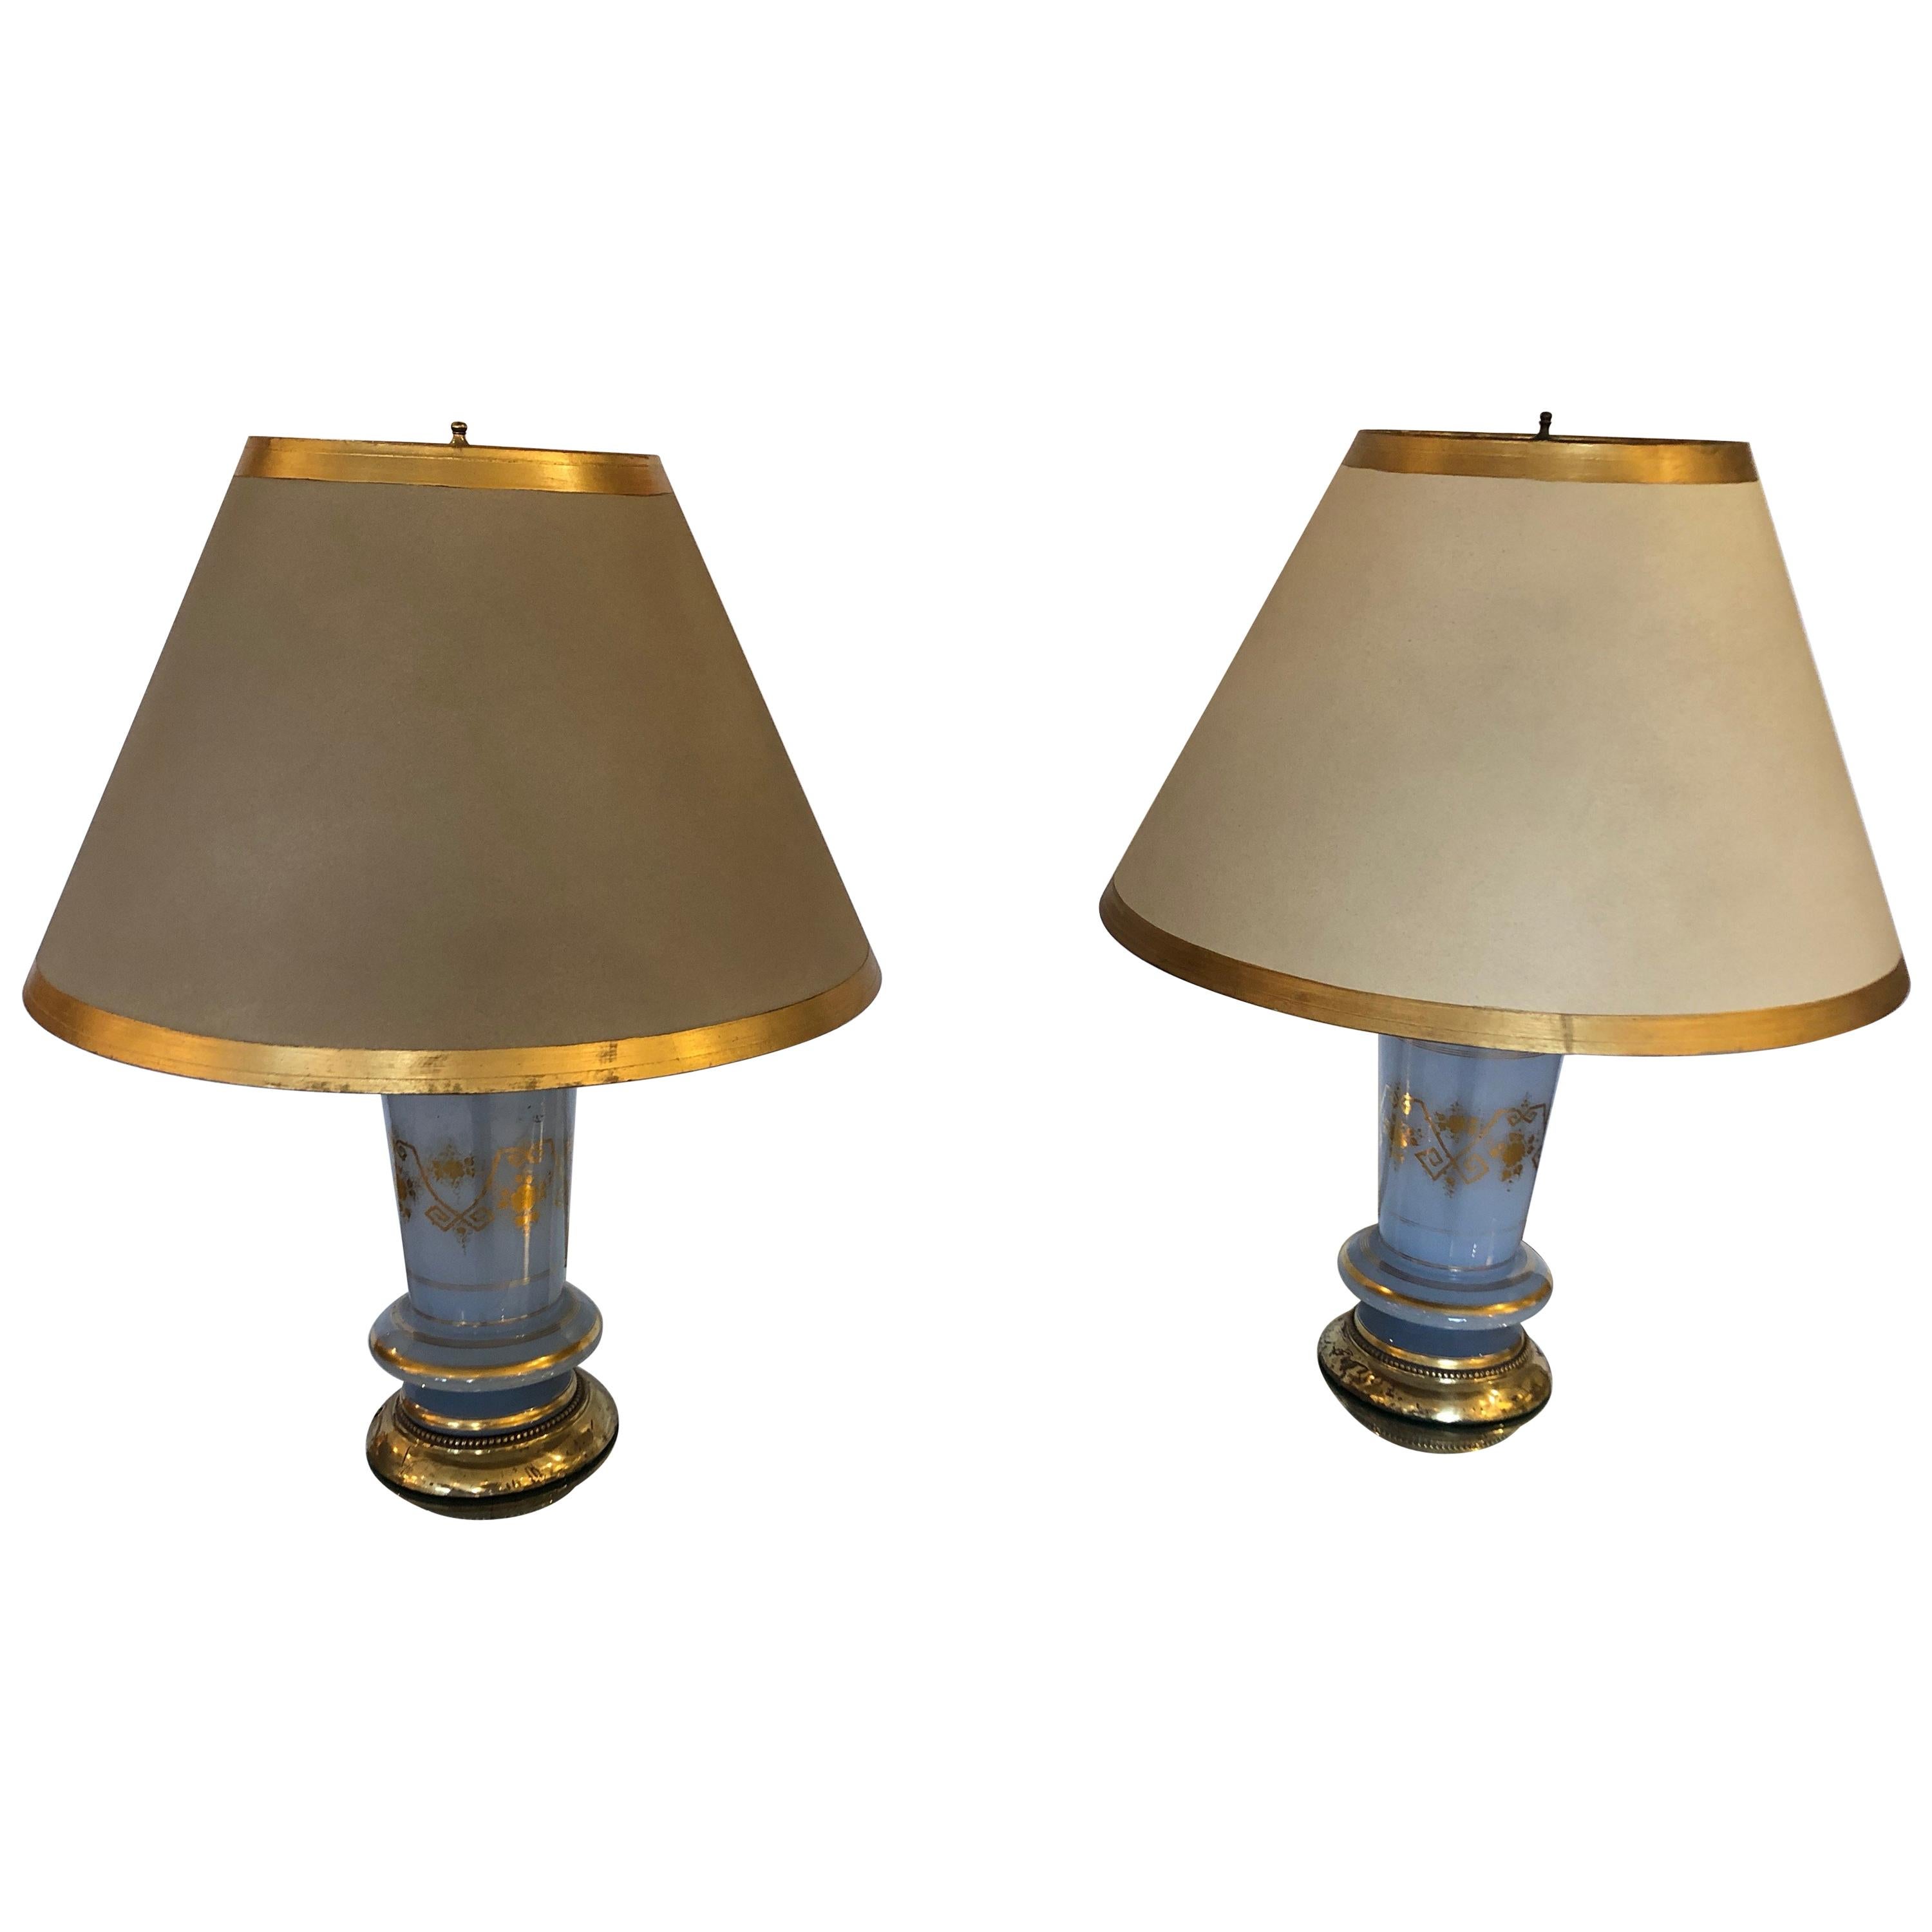 Lovely Pair of Ice Blue and Gold Leaf Table Lamps